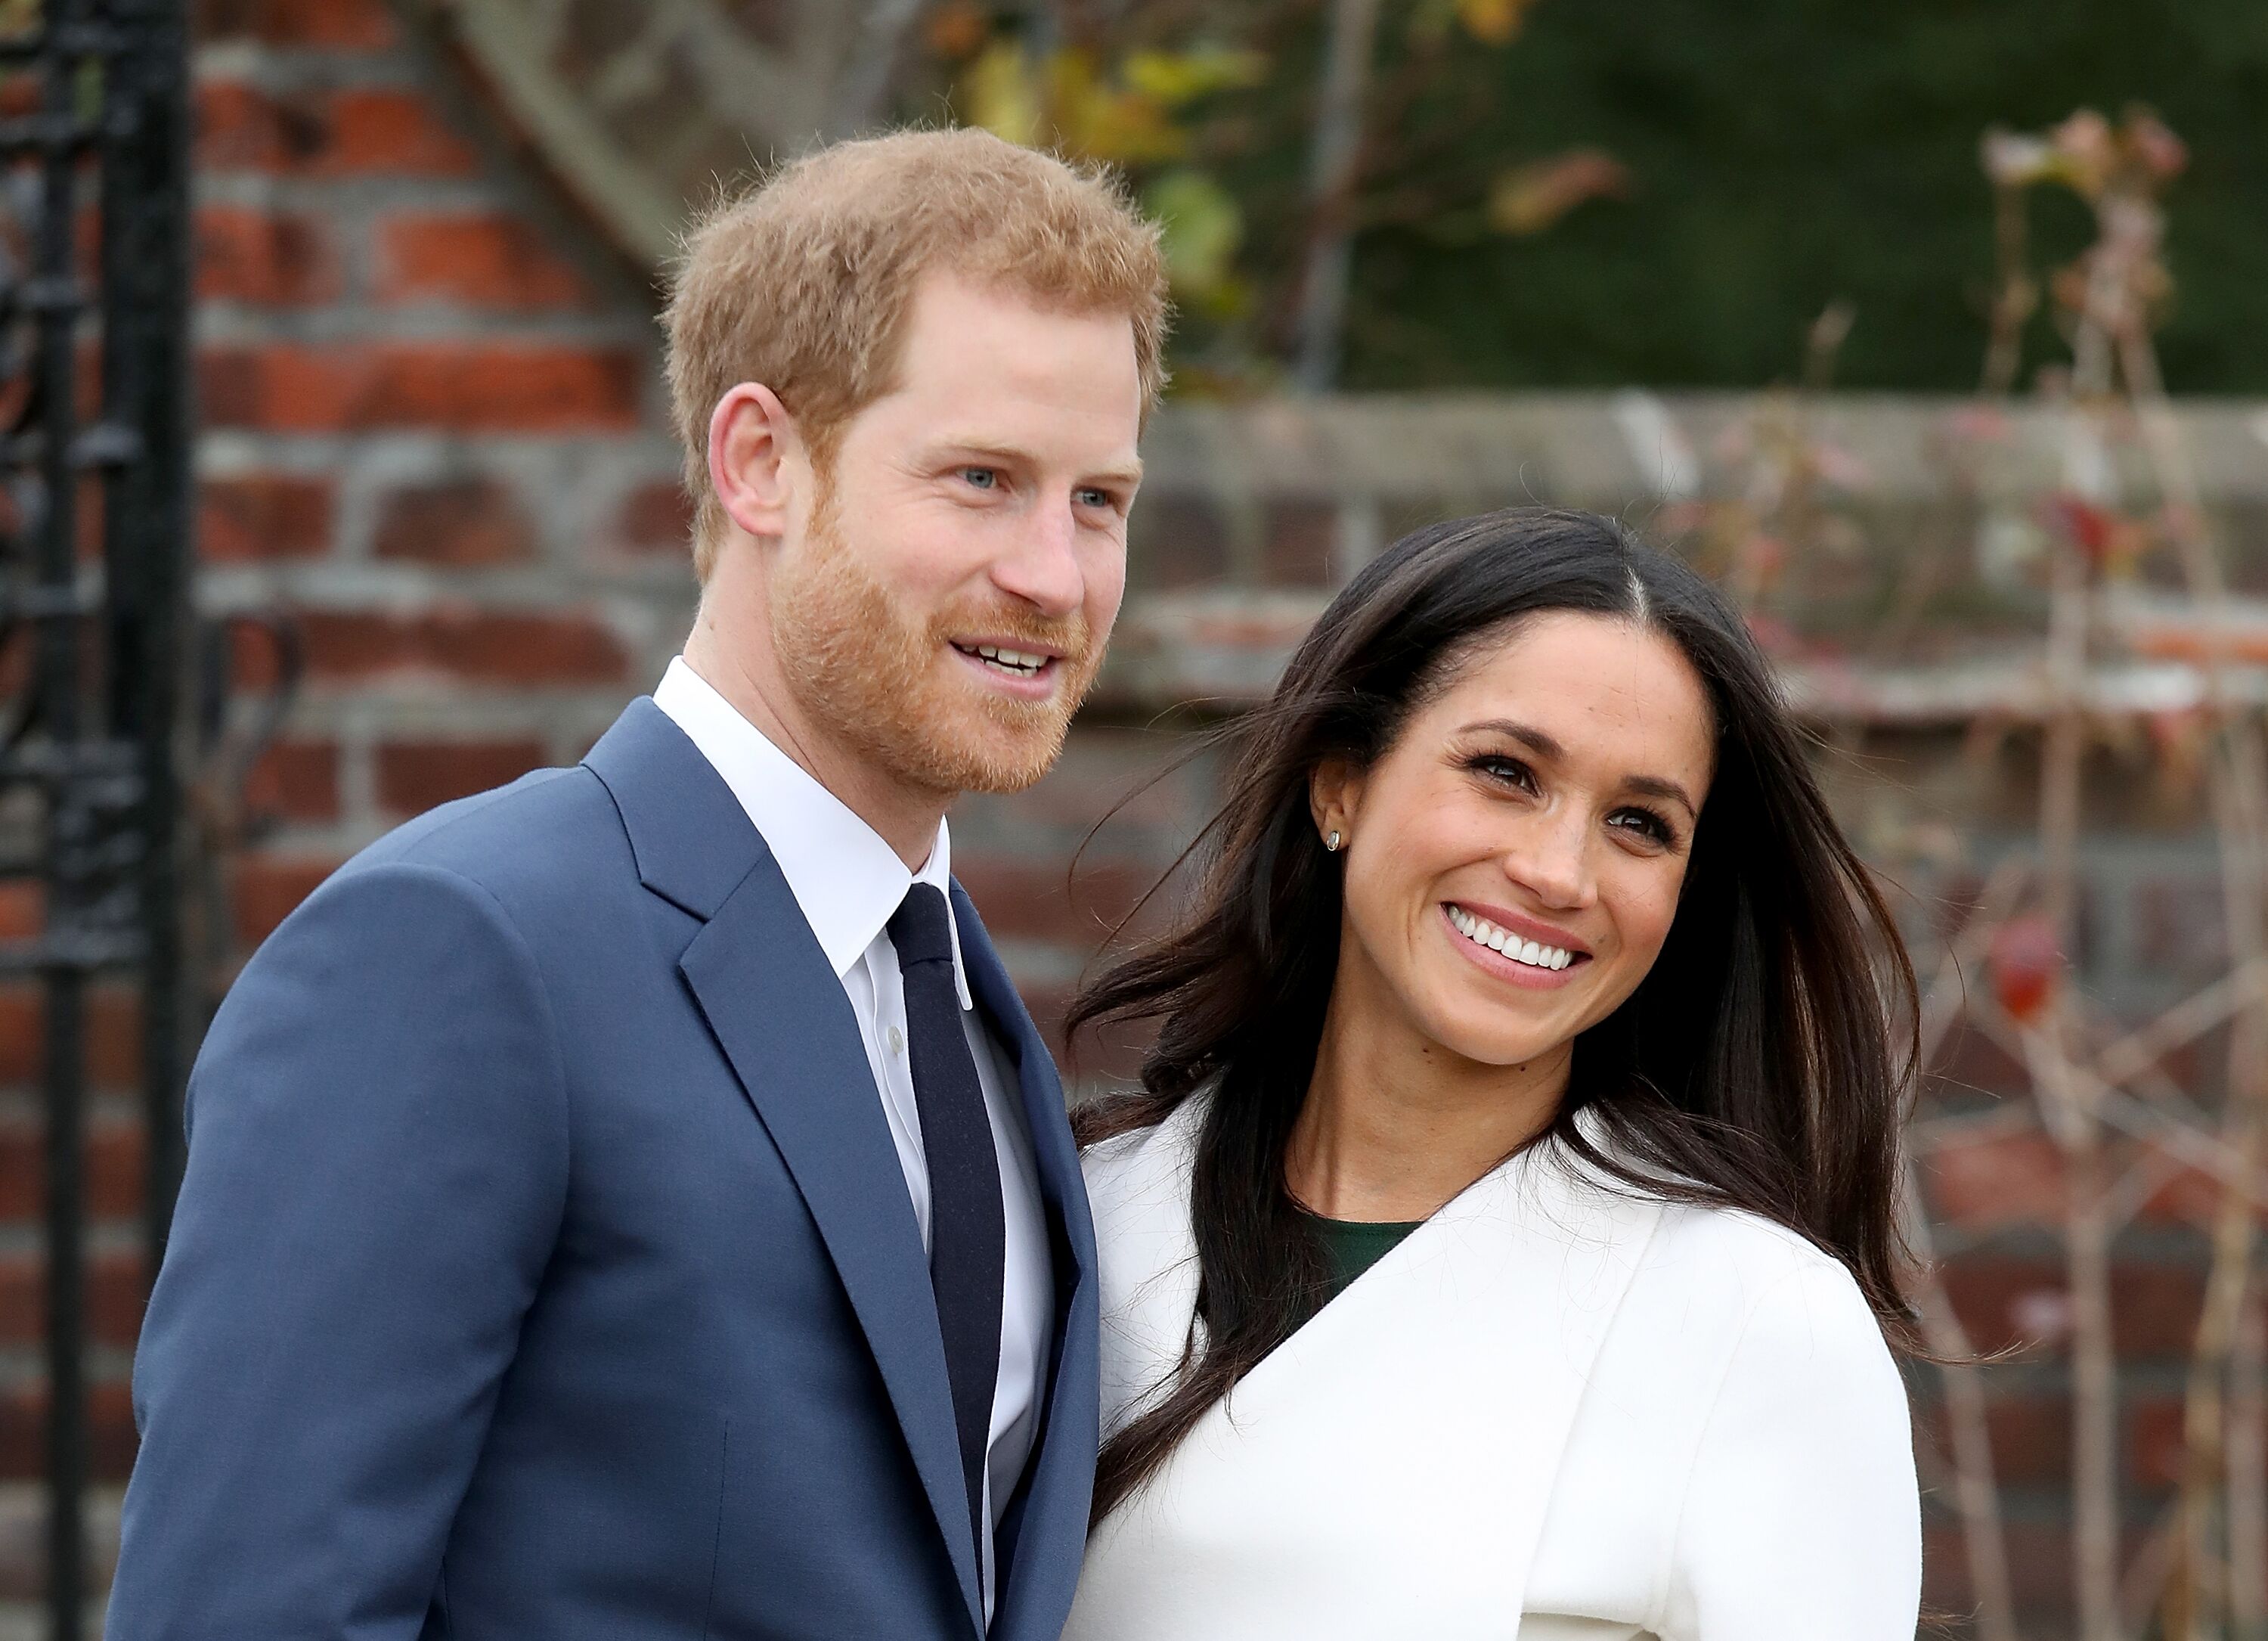 Prince Harry and actress Meghan Markle during an official photocall to announce their engagement at The Sunken Gardens at Kensington Palace on November 27, 2017 | Photo: Getty Images